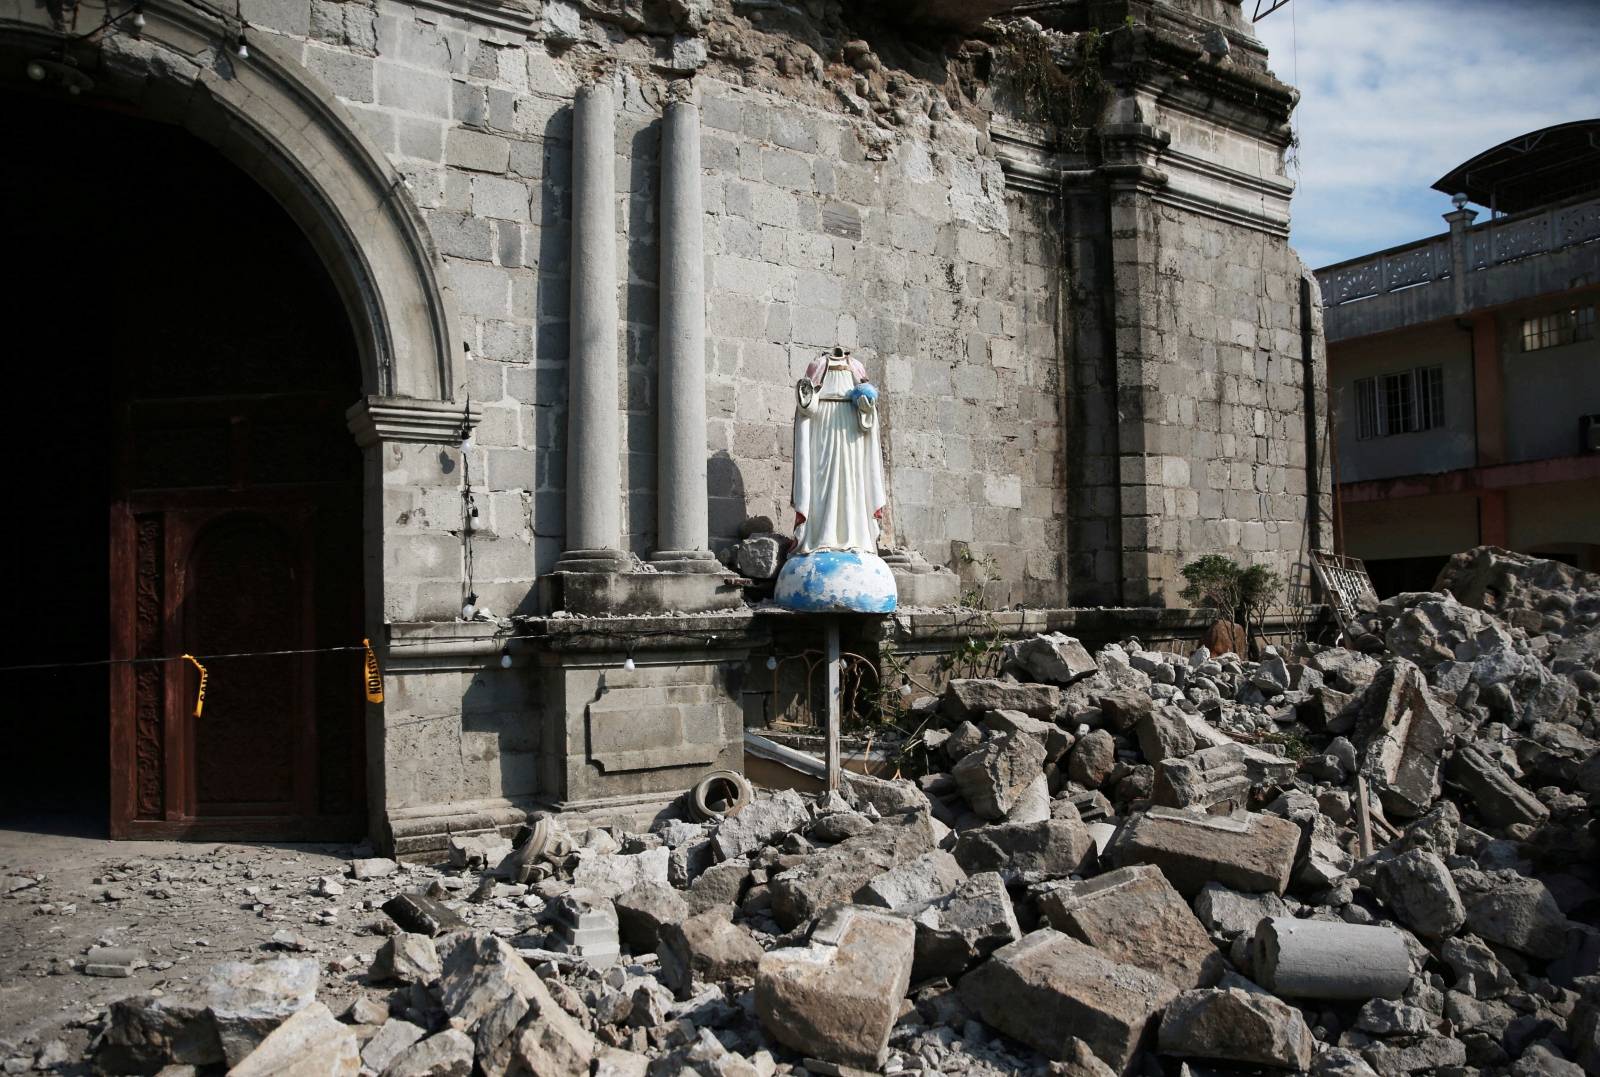 Debris and rubble surround the Santa Catalina de Alejandria Parish after an earthquake the day before in Porac town